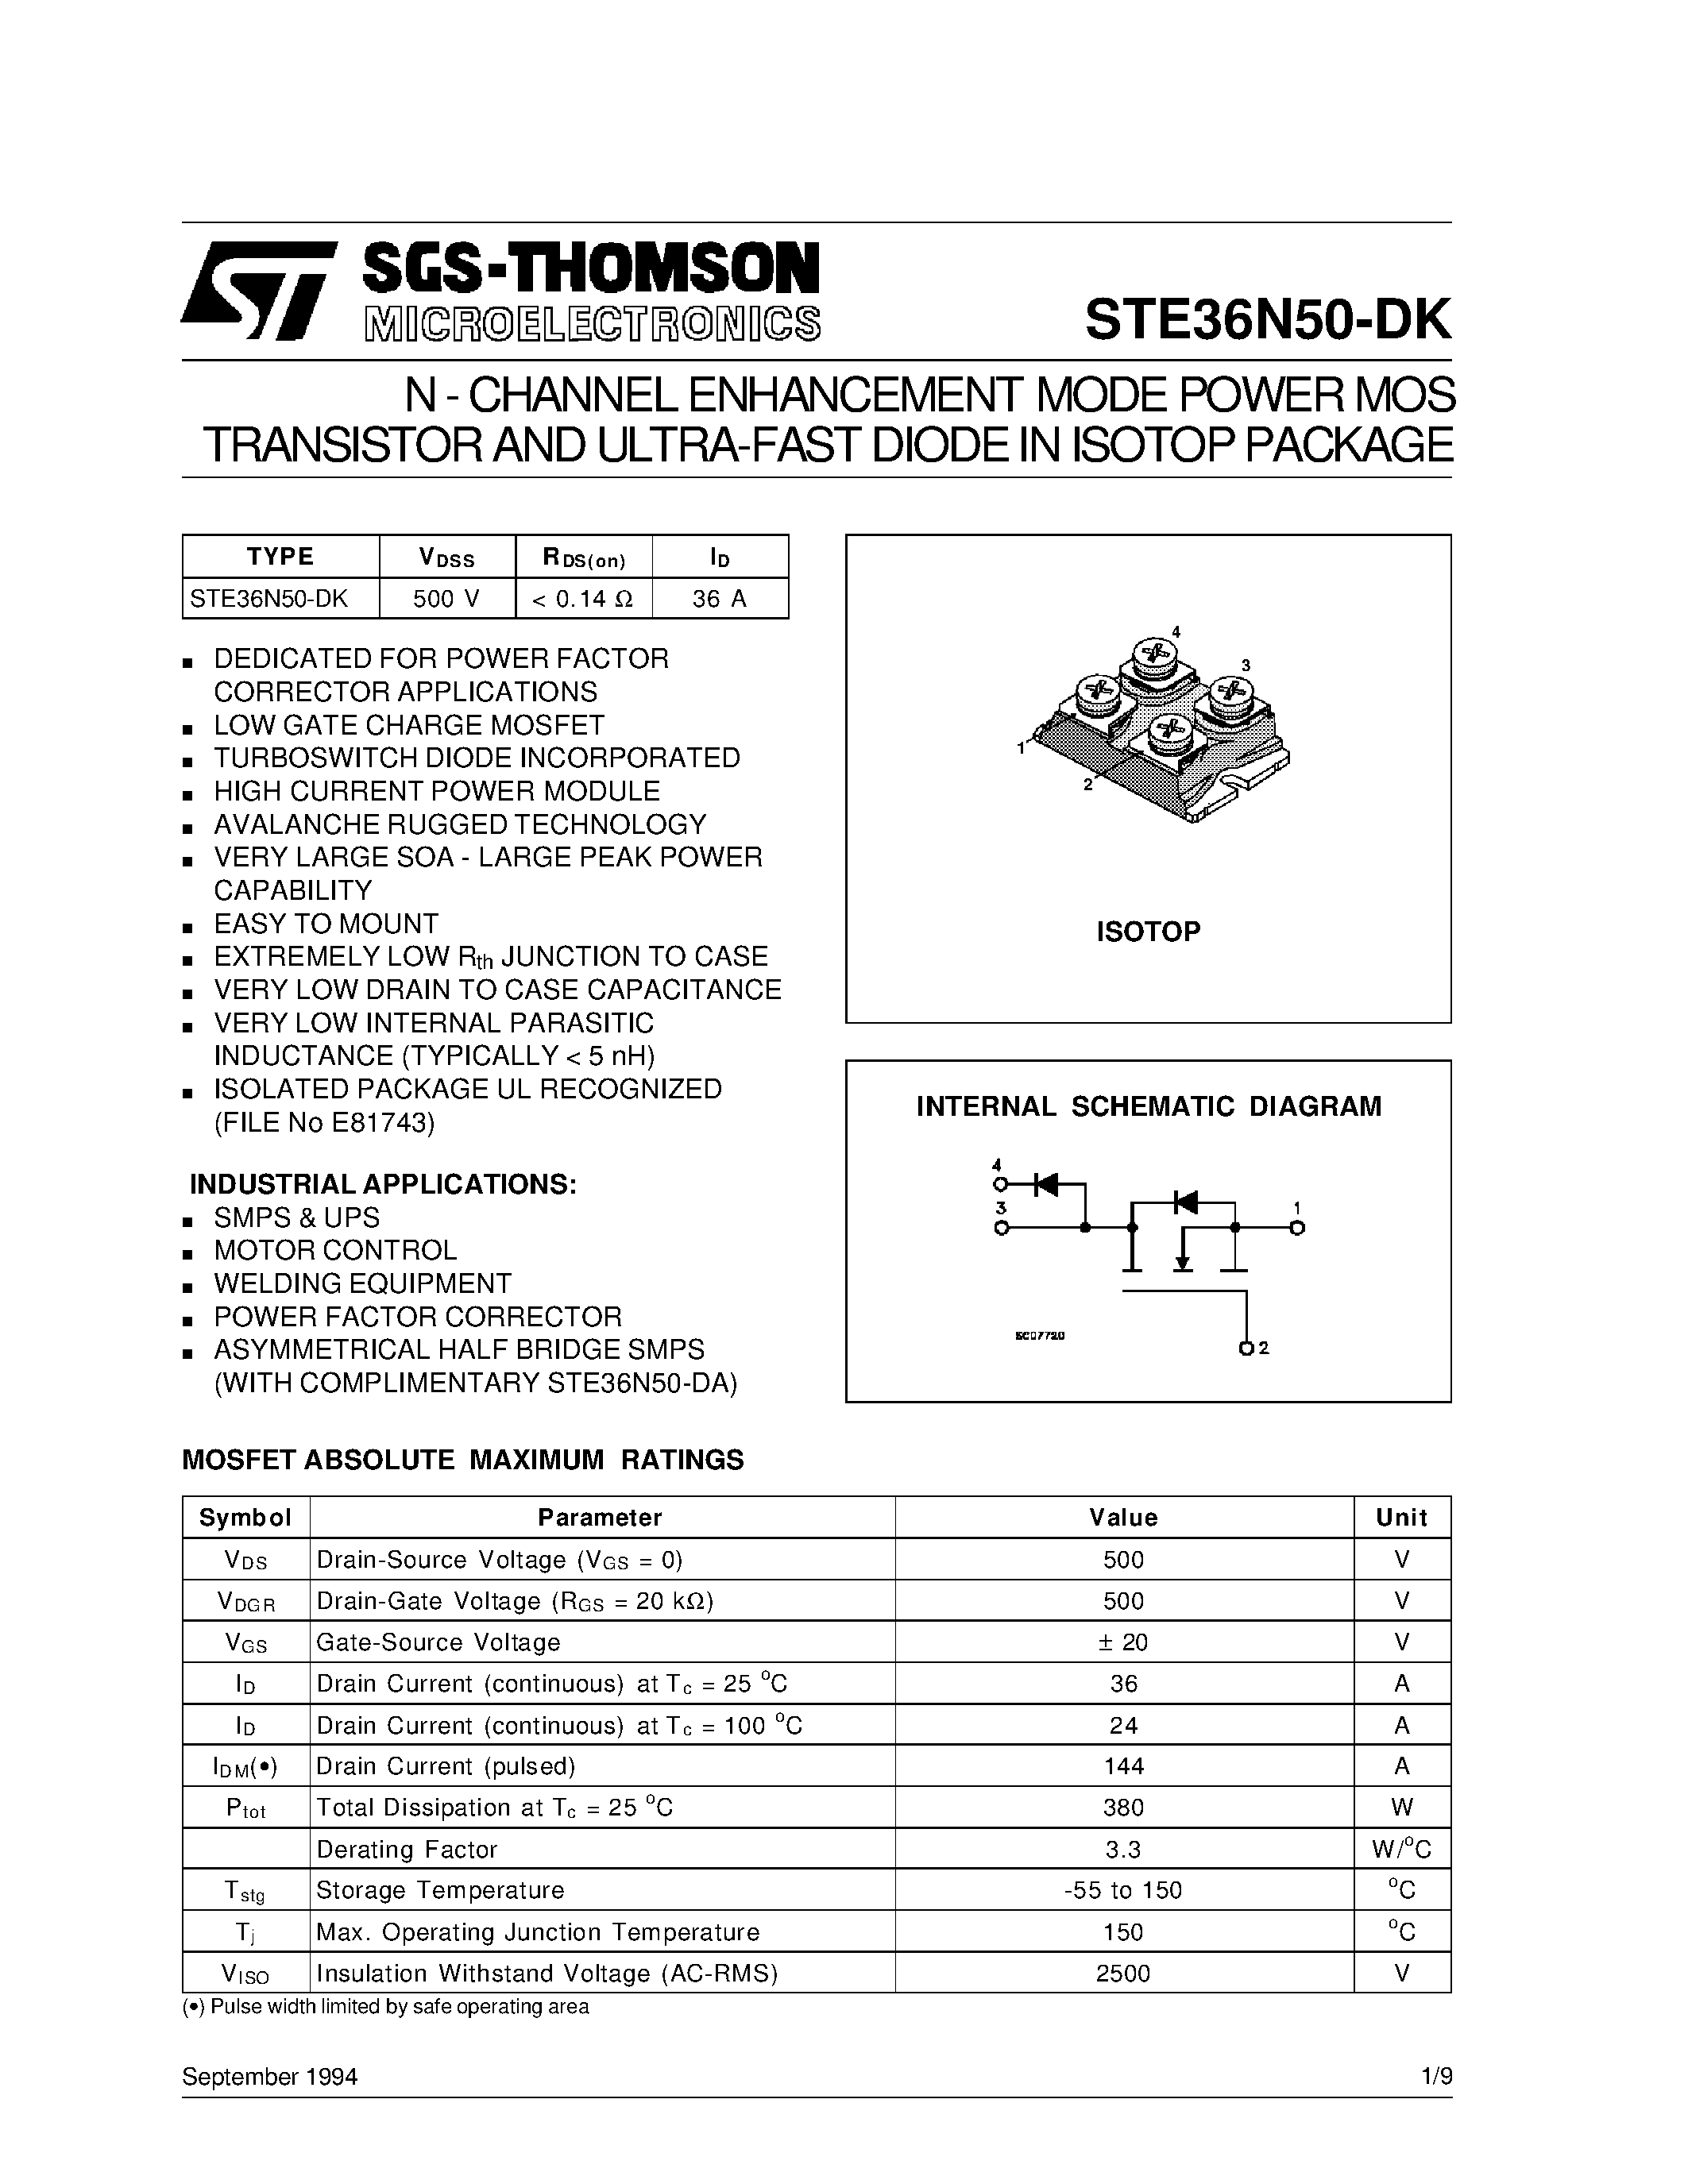 Datasheet STE36N50-DK - N-Channel Enhancement Mode Power MOS Transistor and Ultra-Fast Diode in Isotop Package page 1